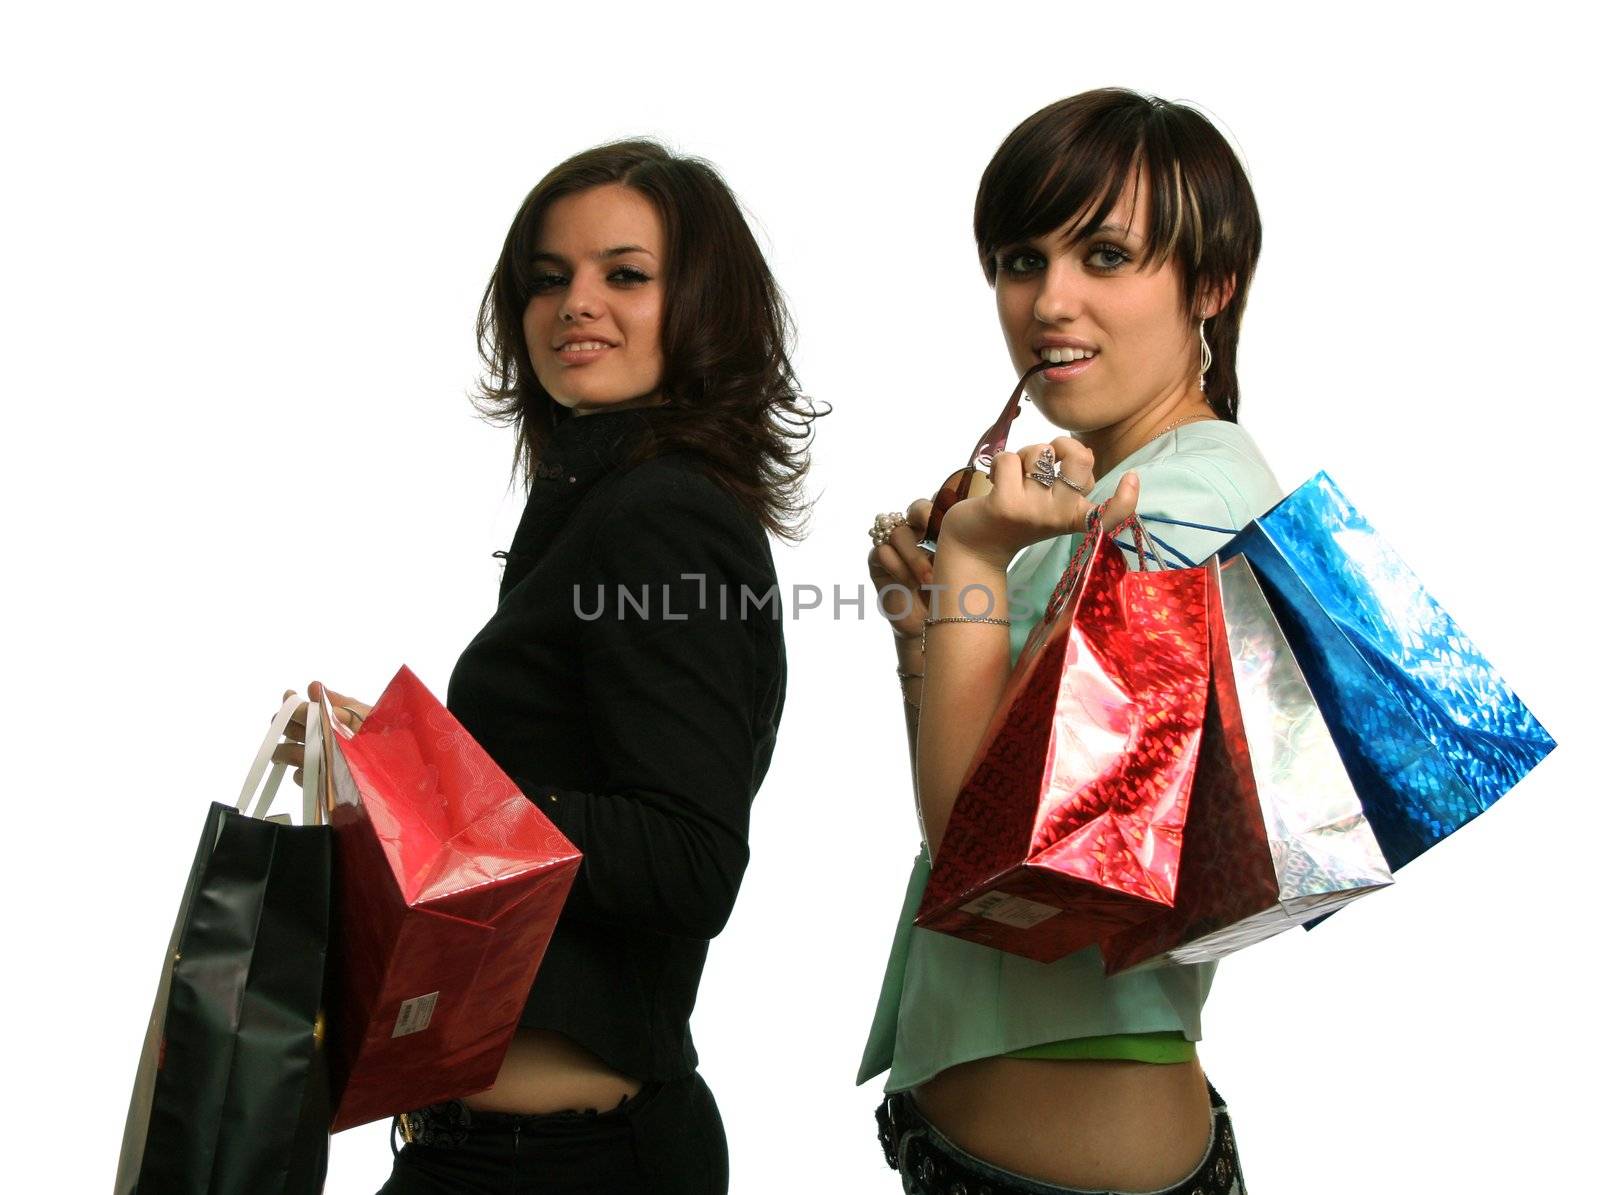 The happy girls with purchases, on a white background 